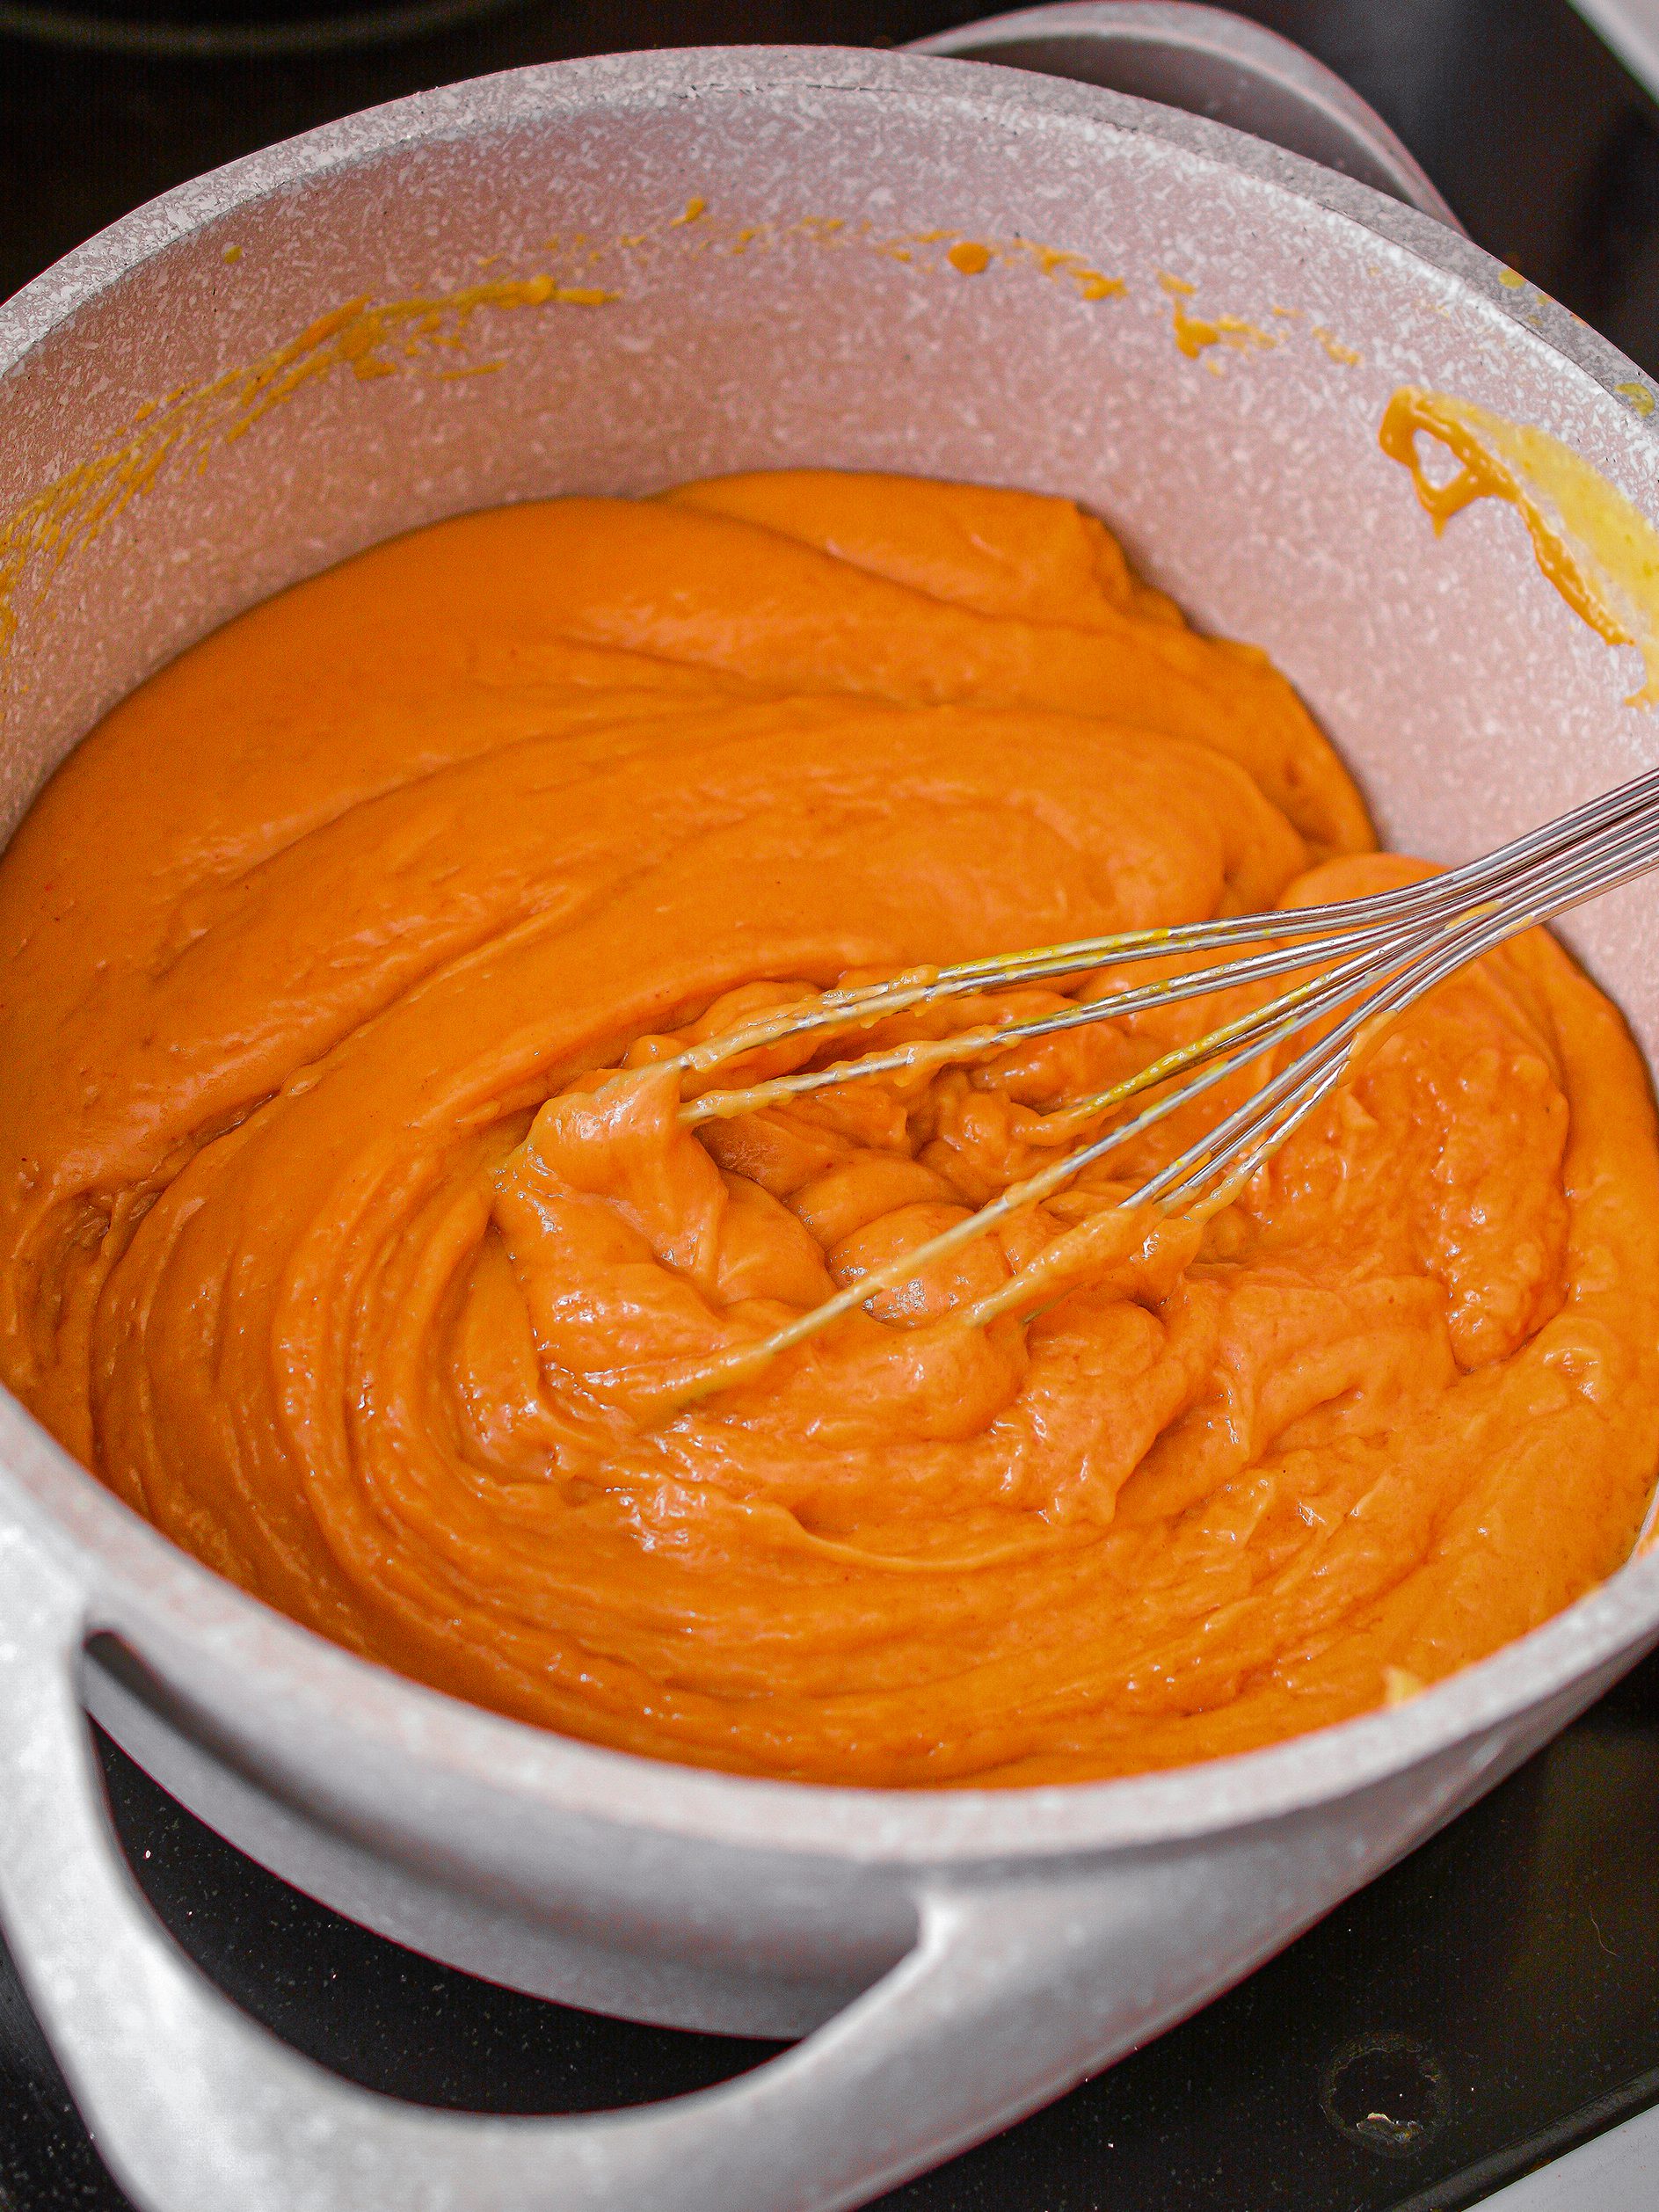 Reduce the heat to a simmer and add in the peanut butter until the mixture has thickened and is smooth.